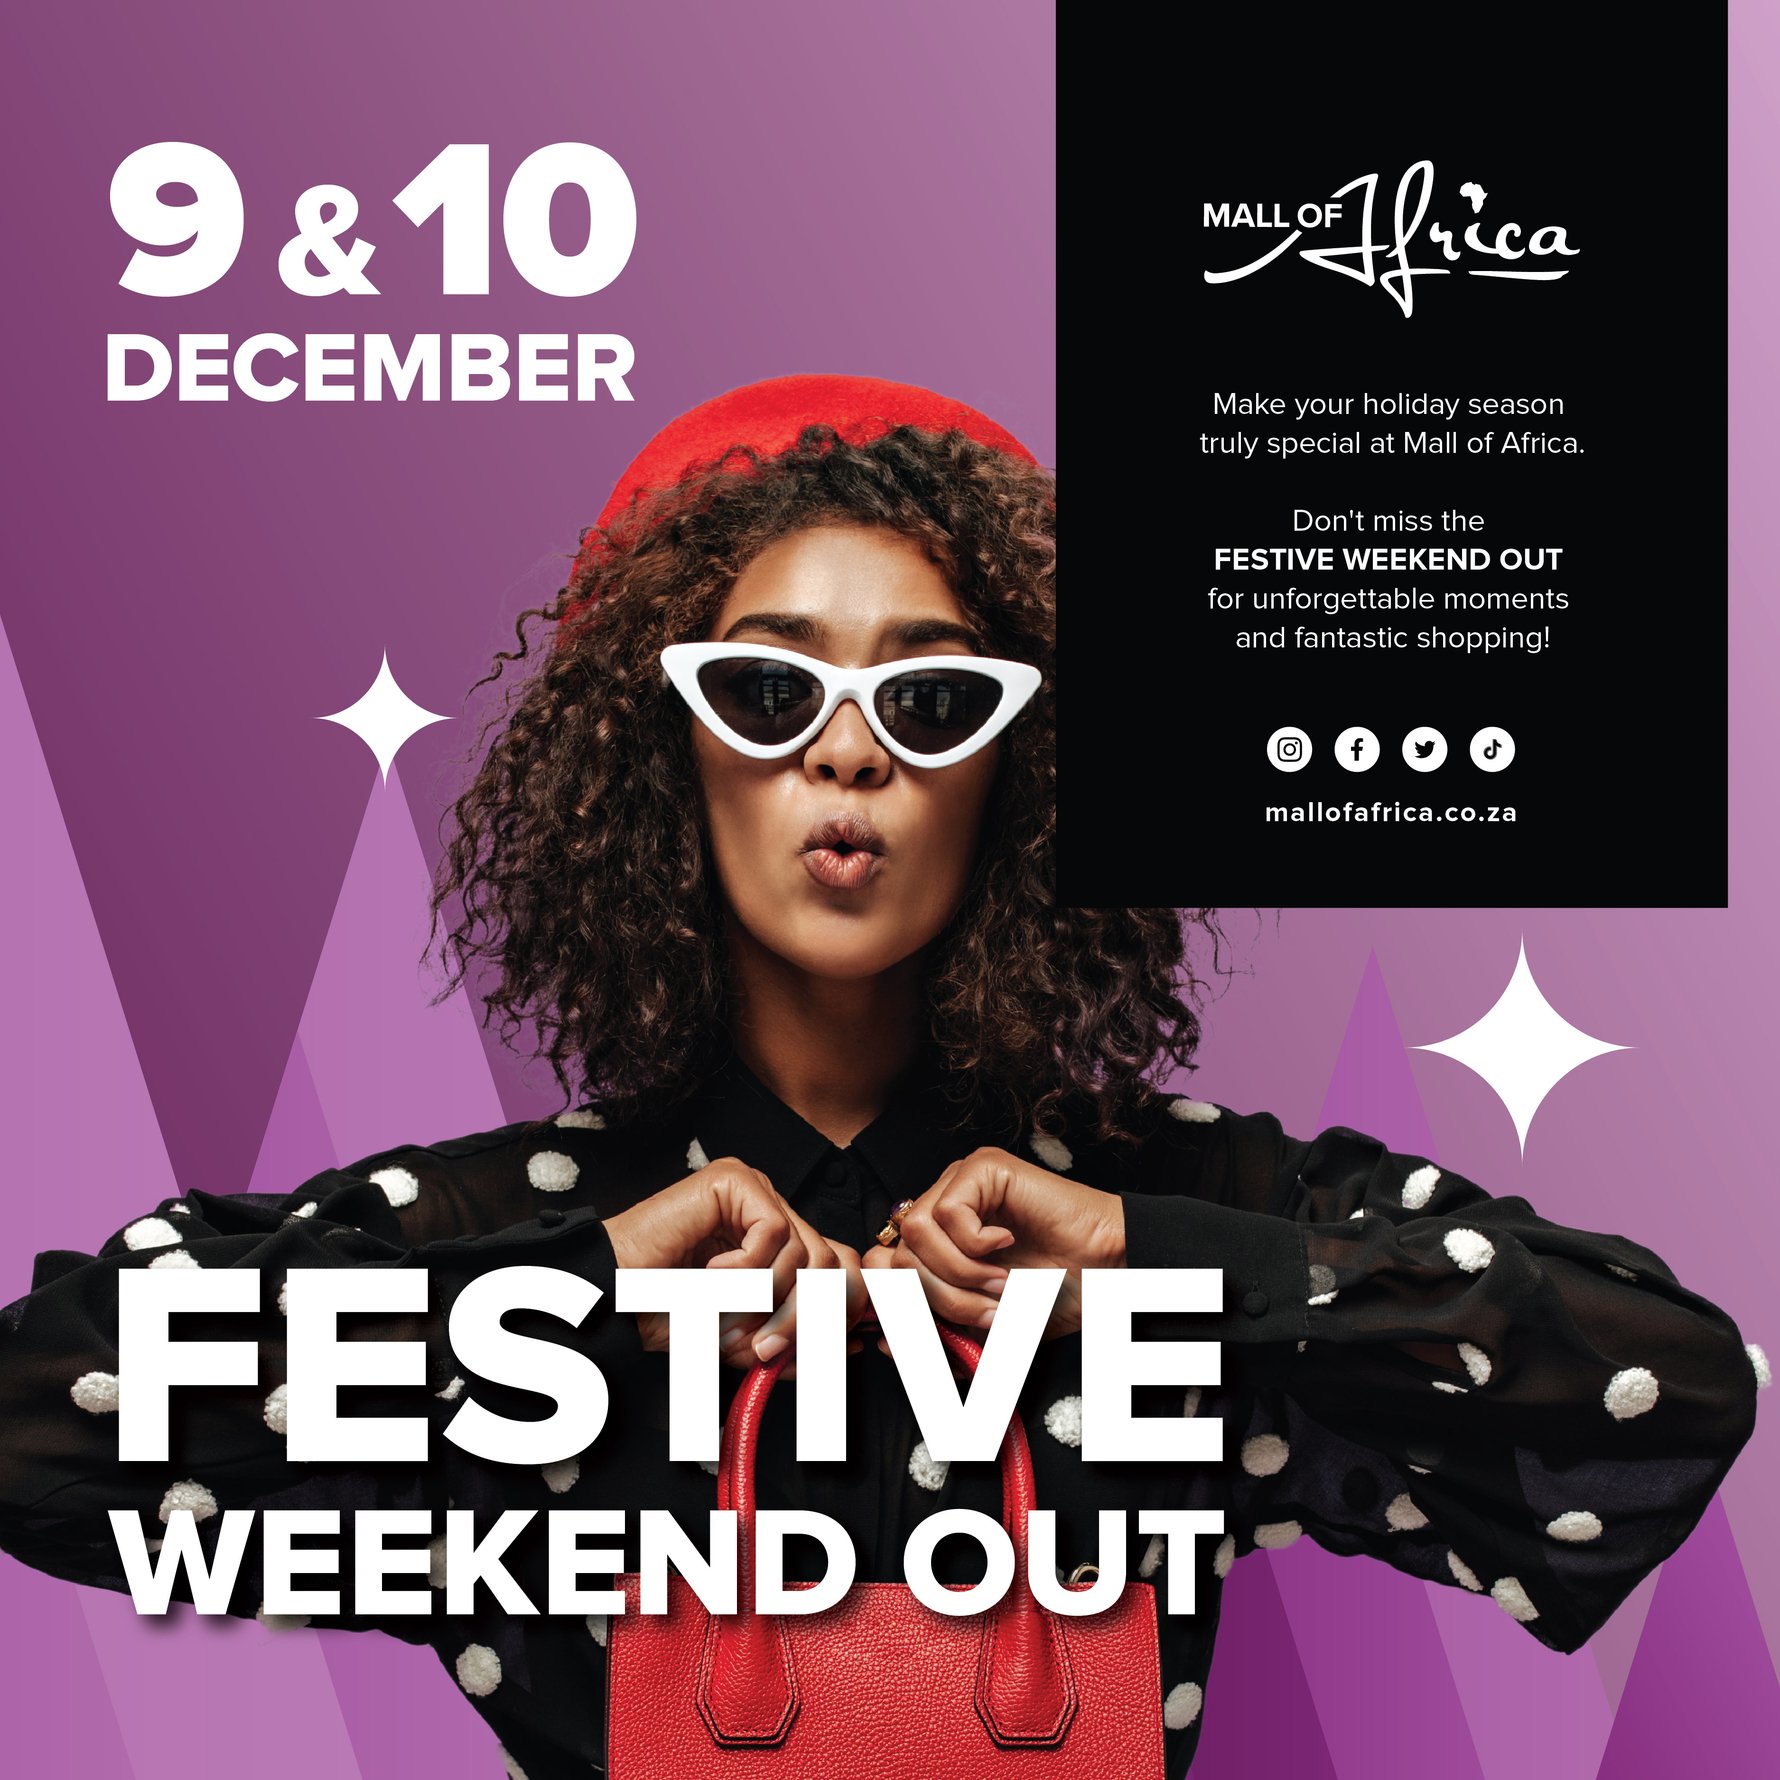 Mall of Africa Festive Weekend Out 